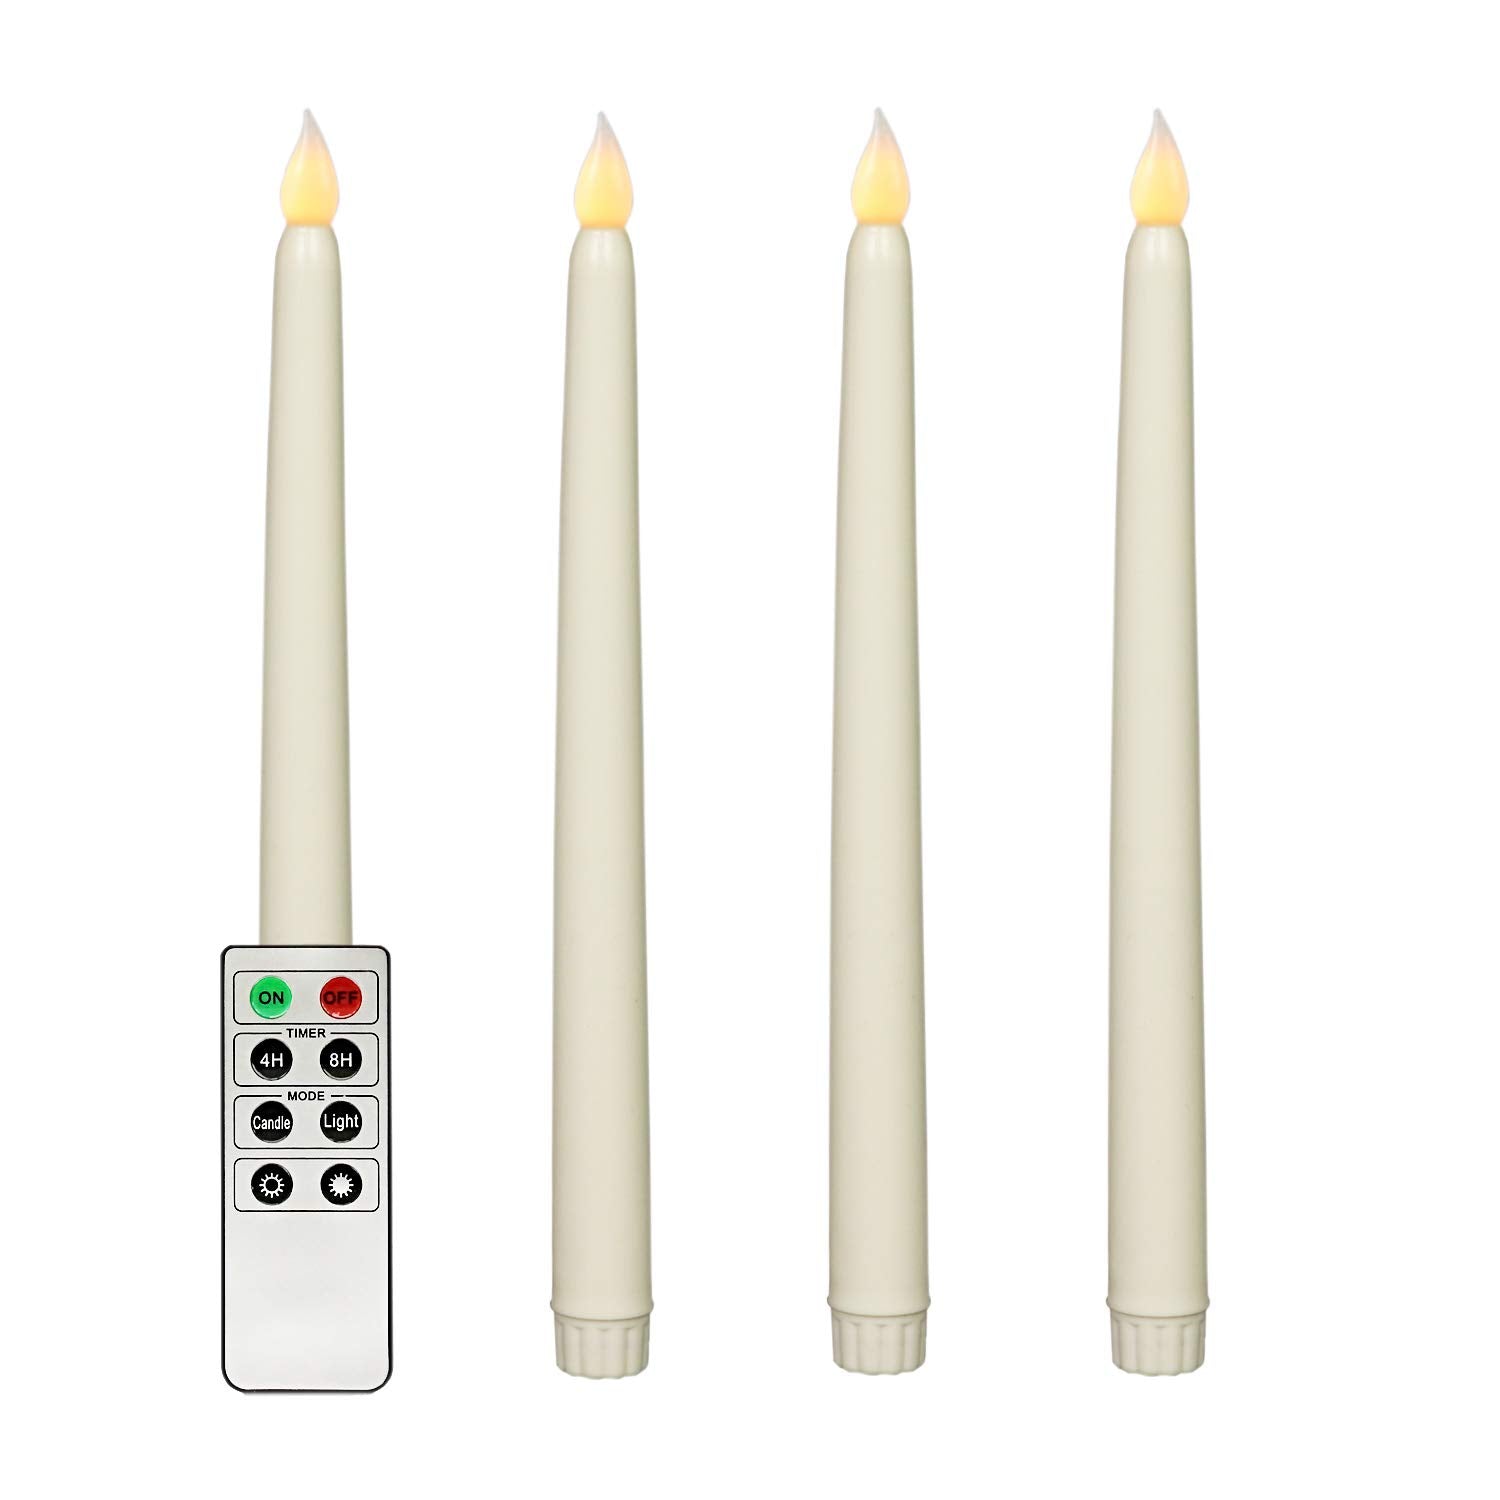 Rhytsing Set of 4 Battery Operated Led Taper Candles with Remote, Ivory Dining Candles Smooth Wax Finish, Warm White LED, Batteries Included